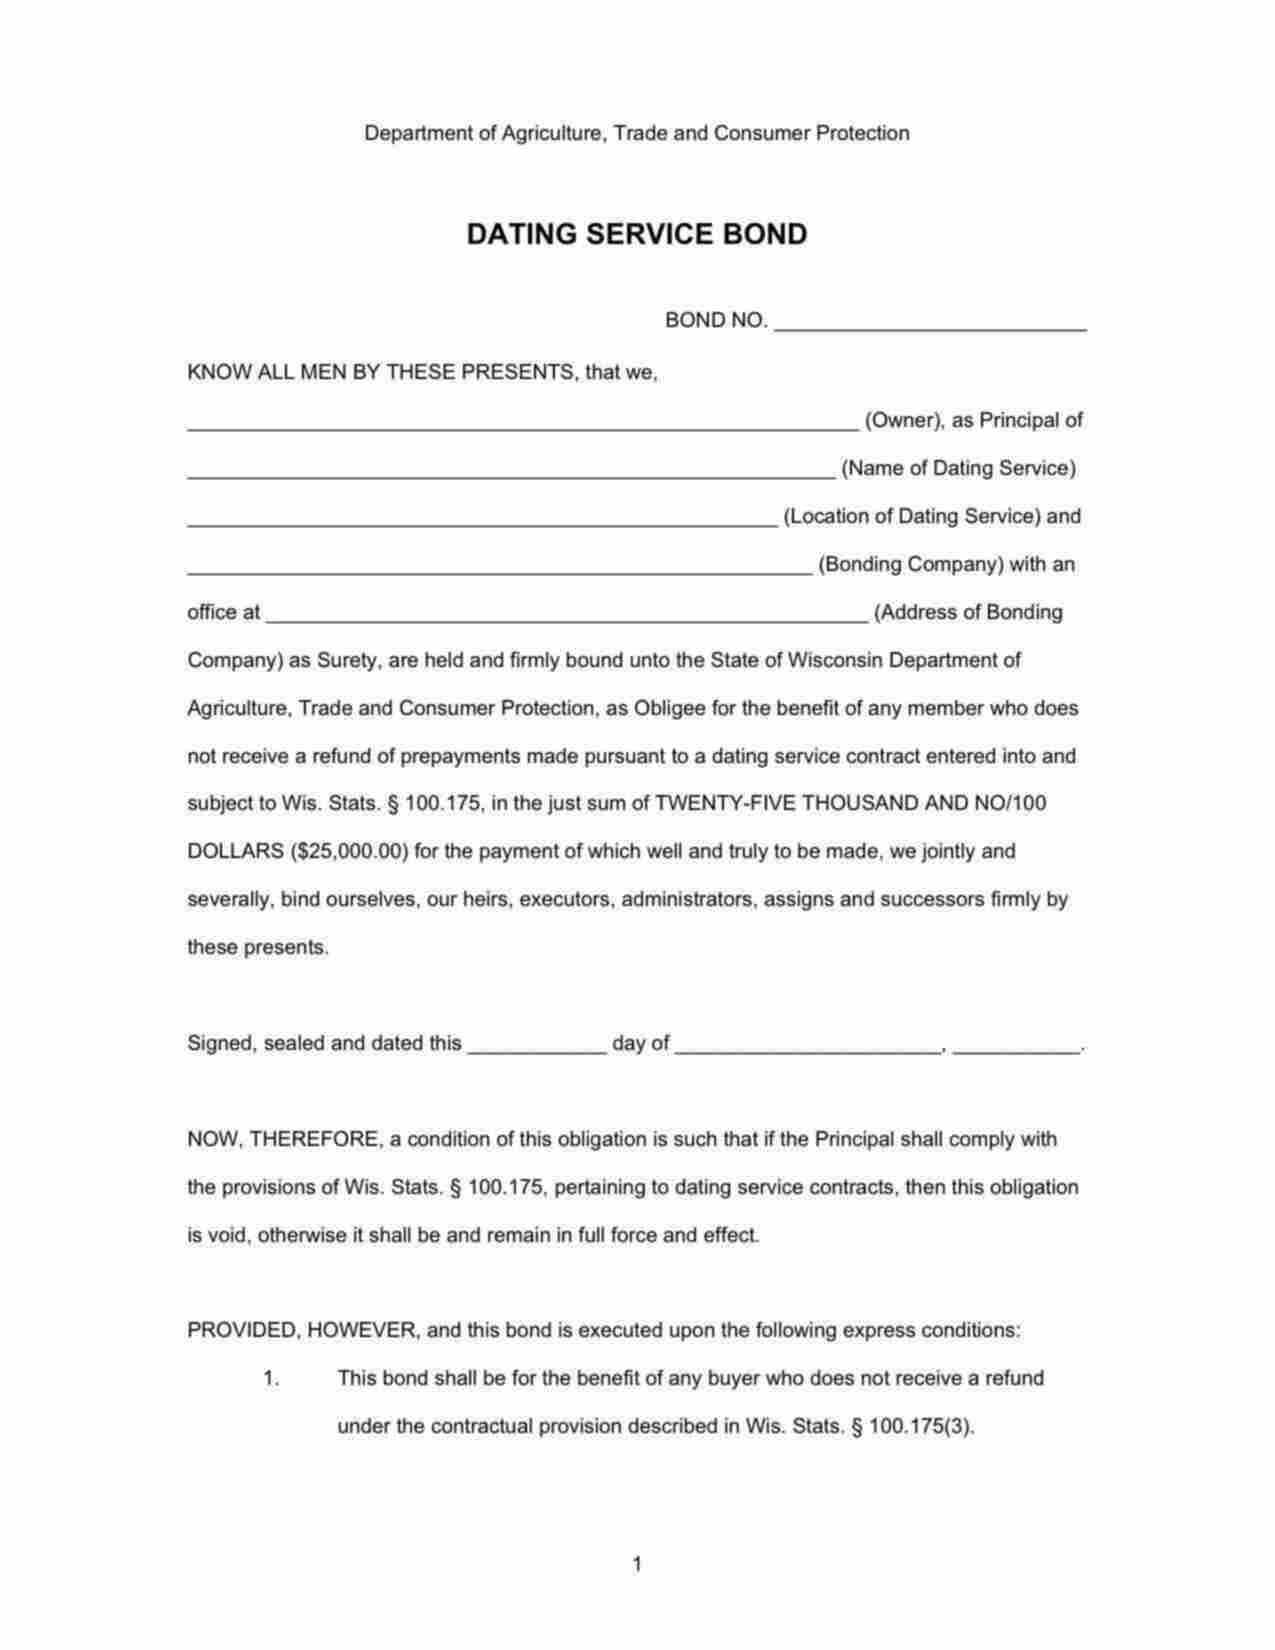 Wisconsin Dating Service Bond Form